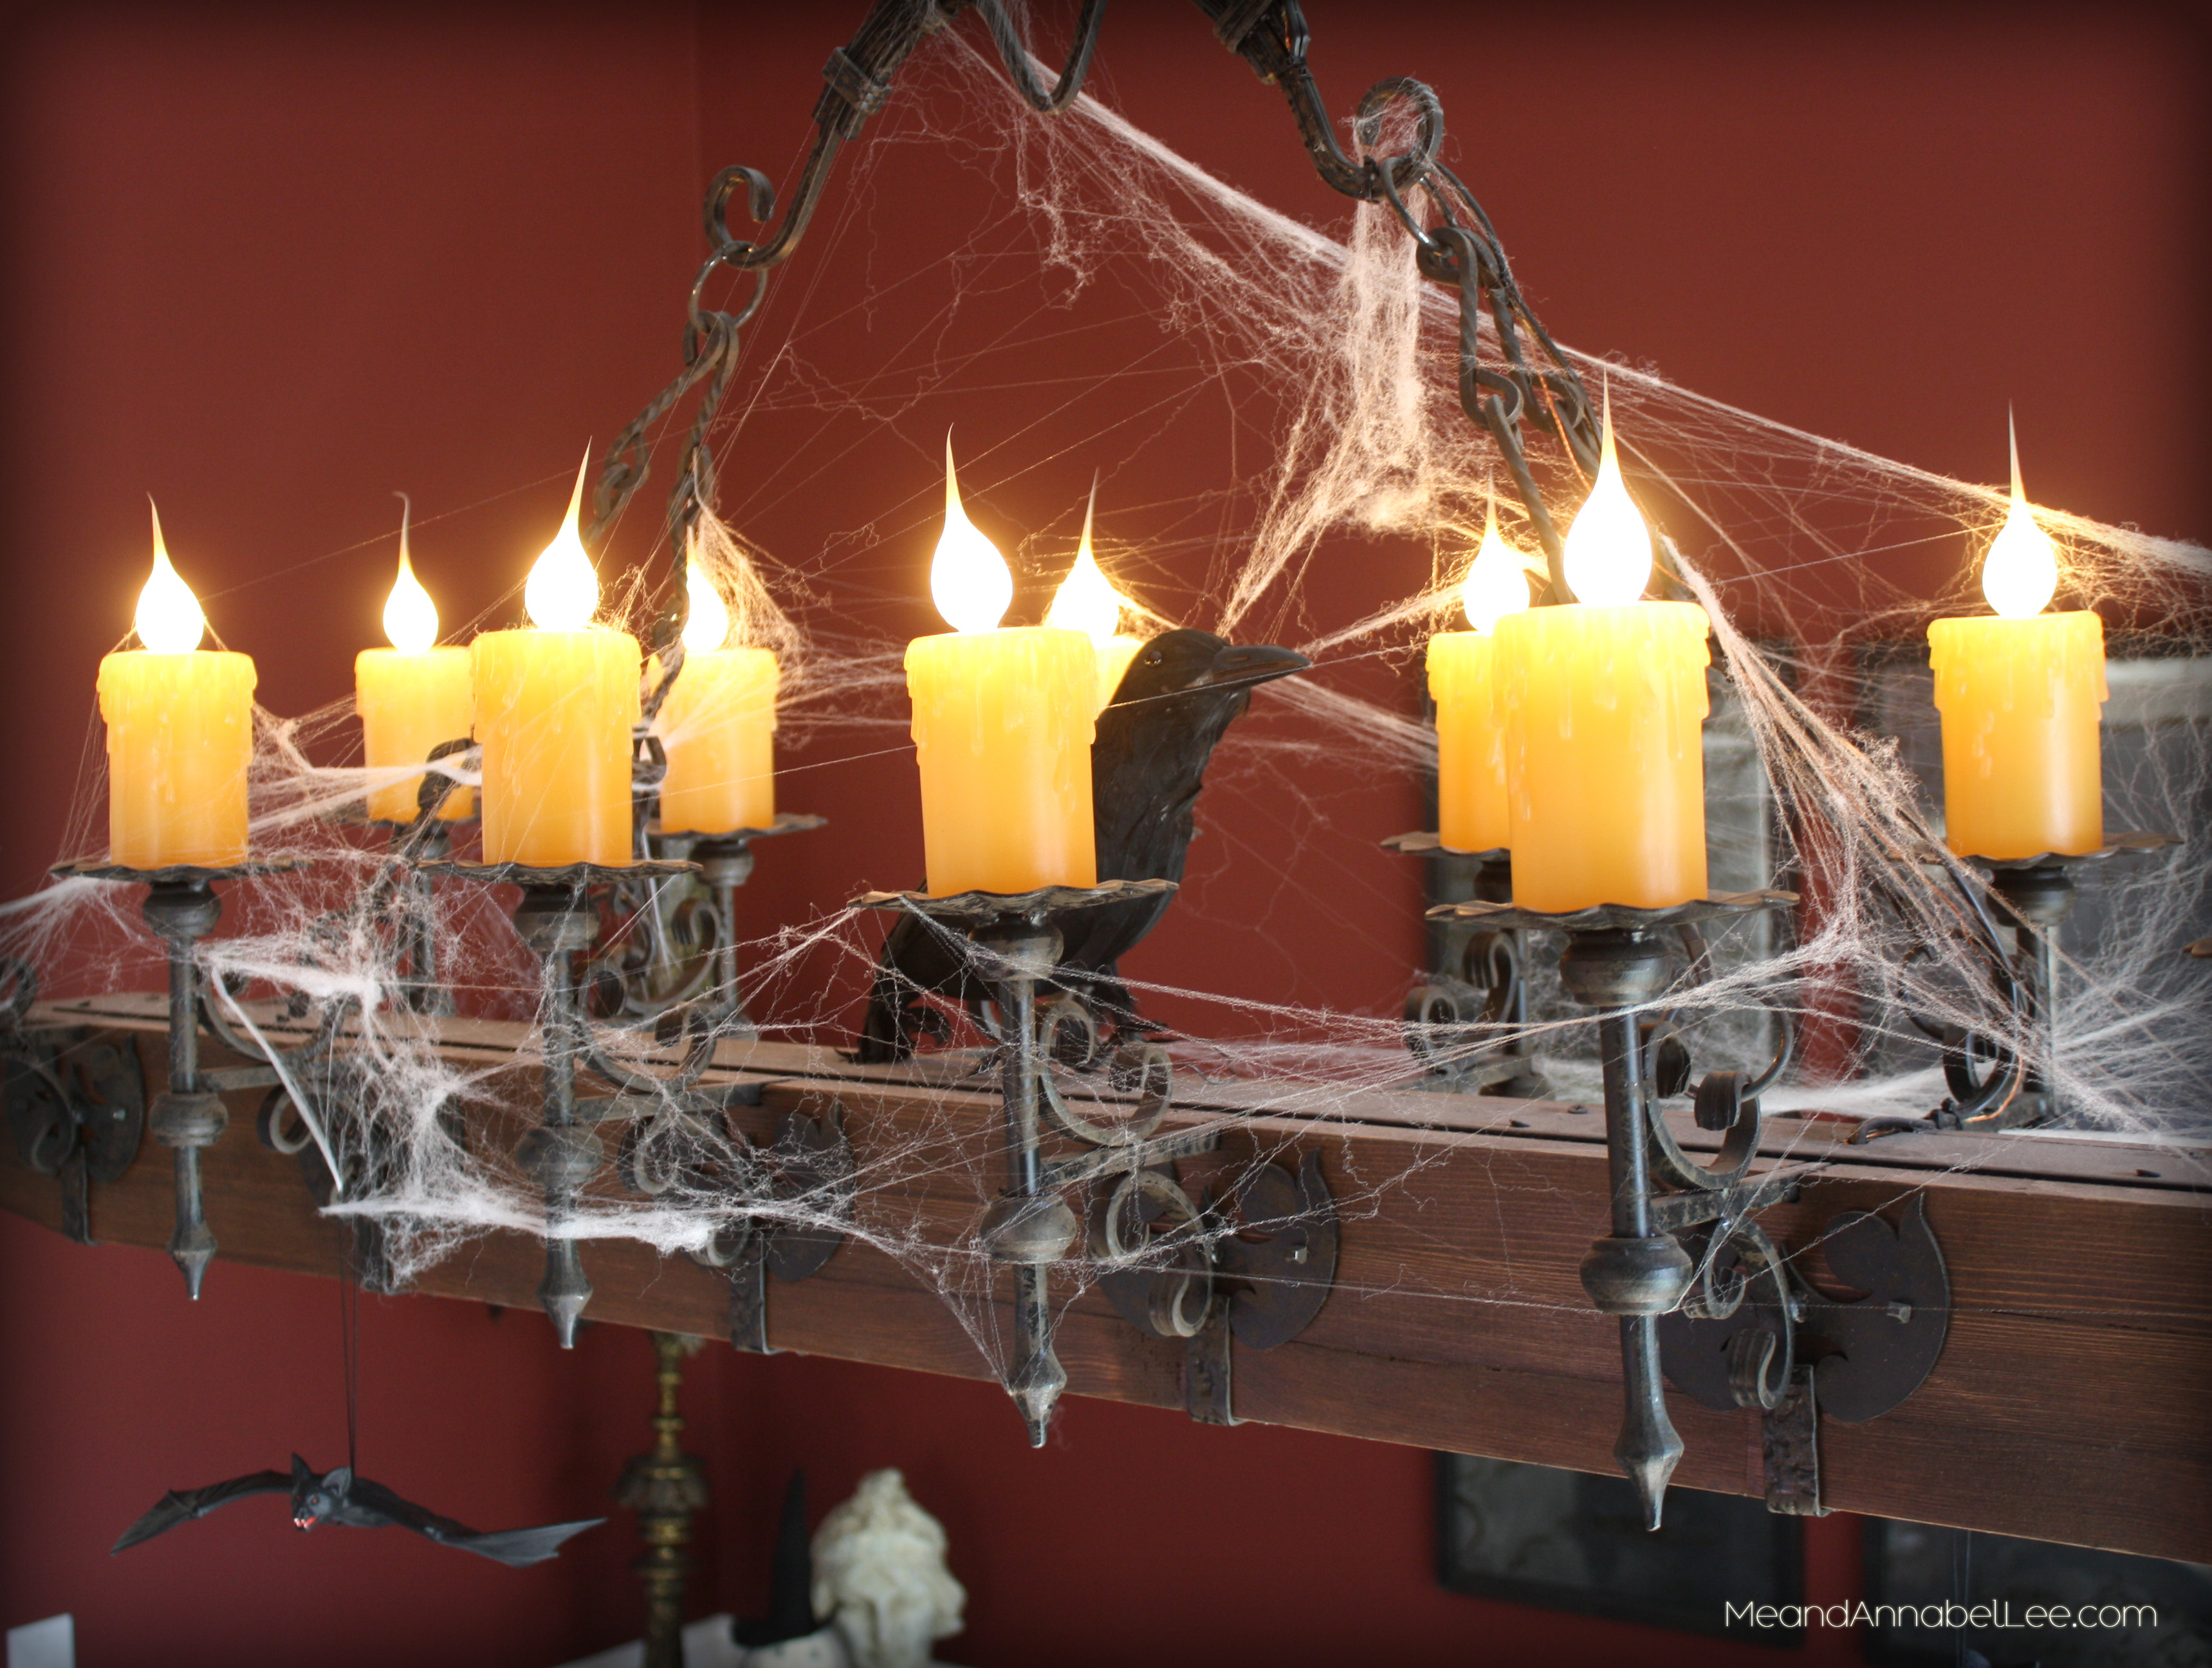 Halloween Party Decorations | Gothic Chandelier | Cobwebs | Raven | www.MeandAnnabelLee.com